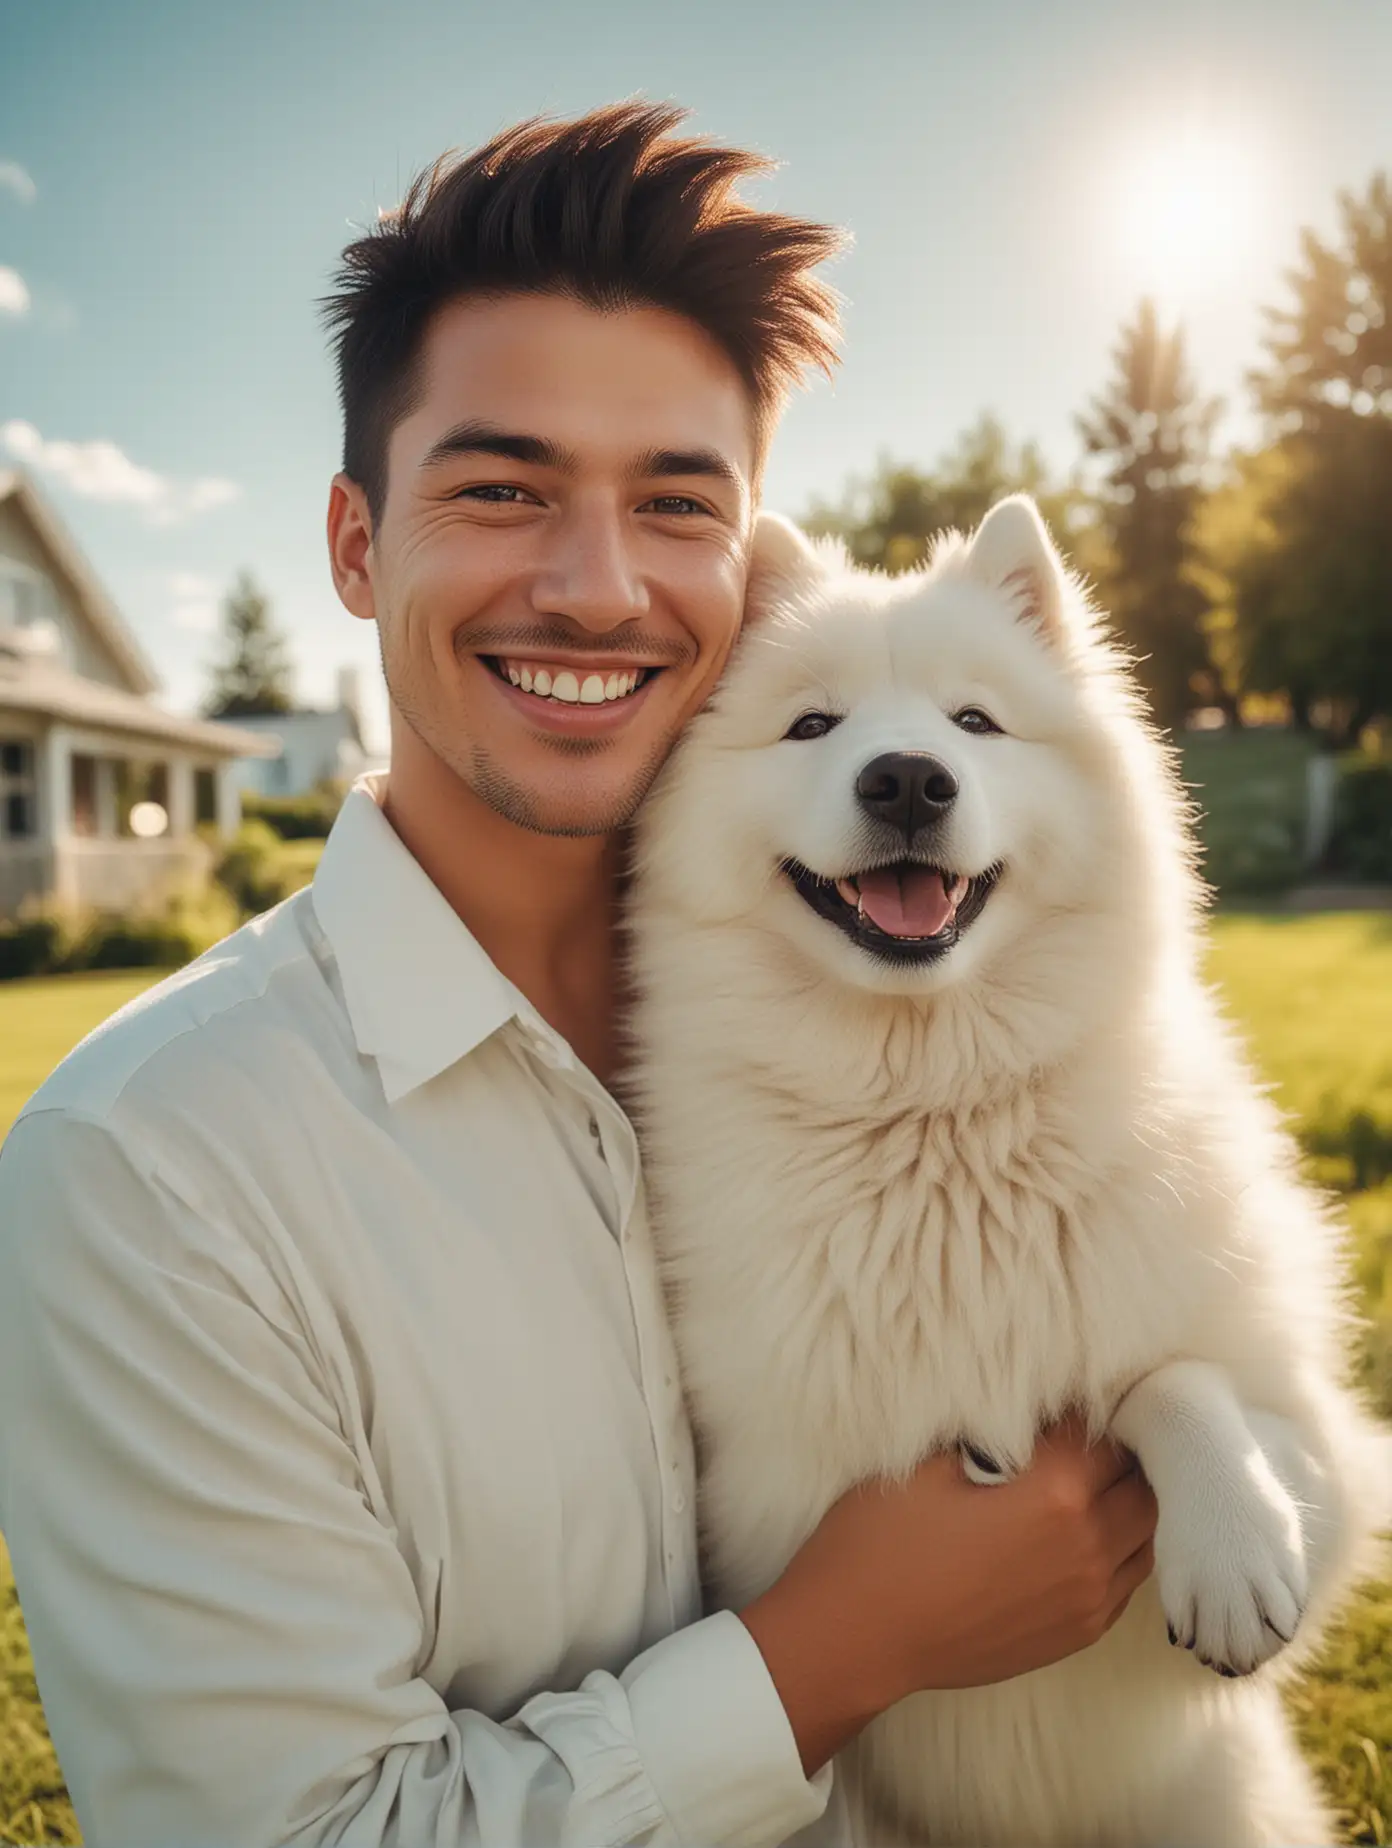 Handsome Man Smiling with Samoyed in Sunlit Outdoor Portrait